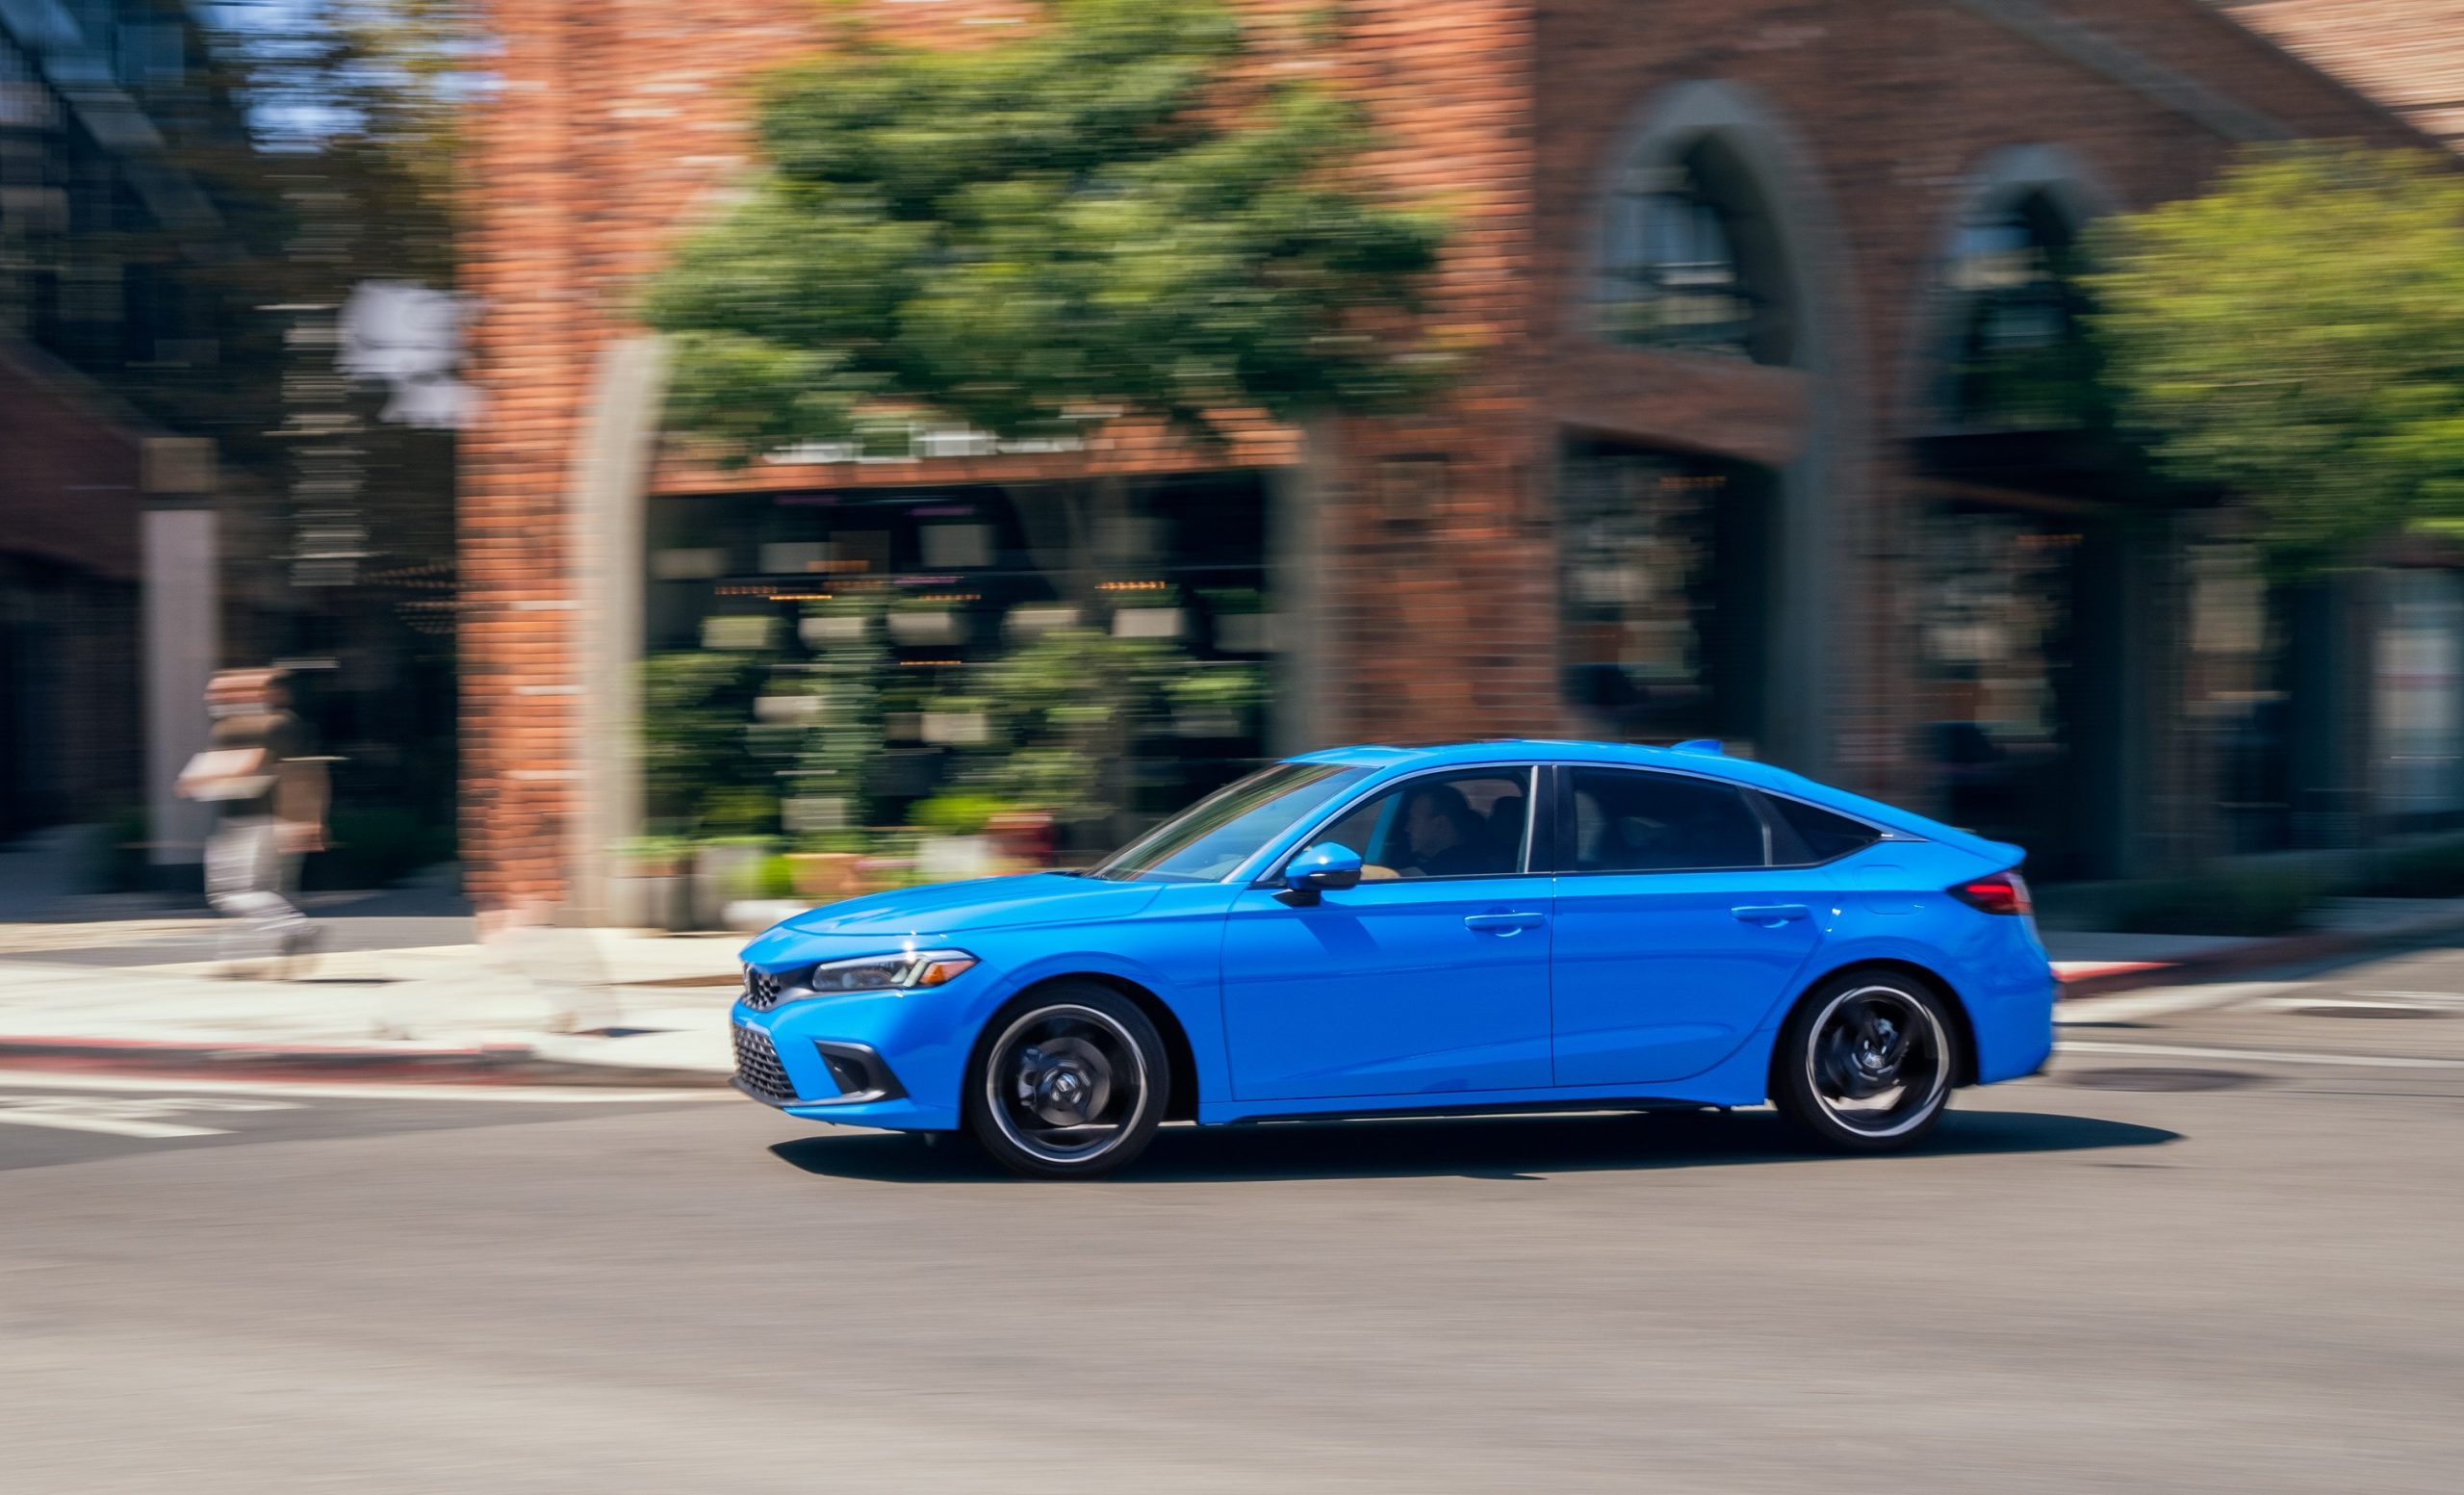 A blue 2022 Honda Civic hatchback shot in profile while rolling down a city street